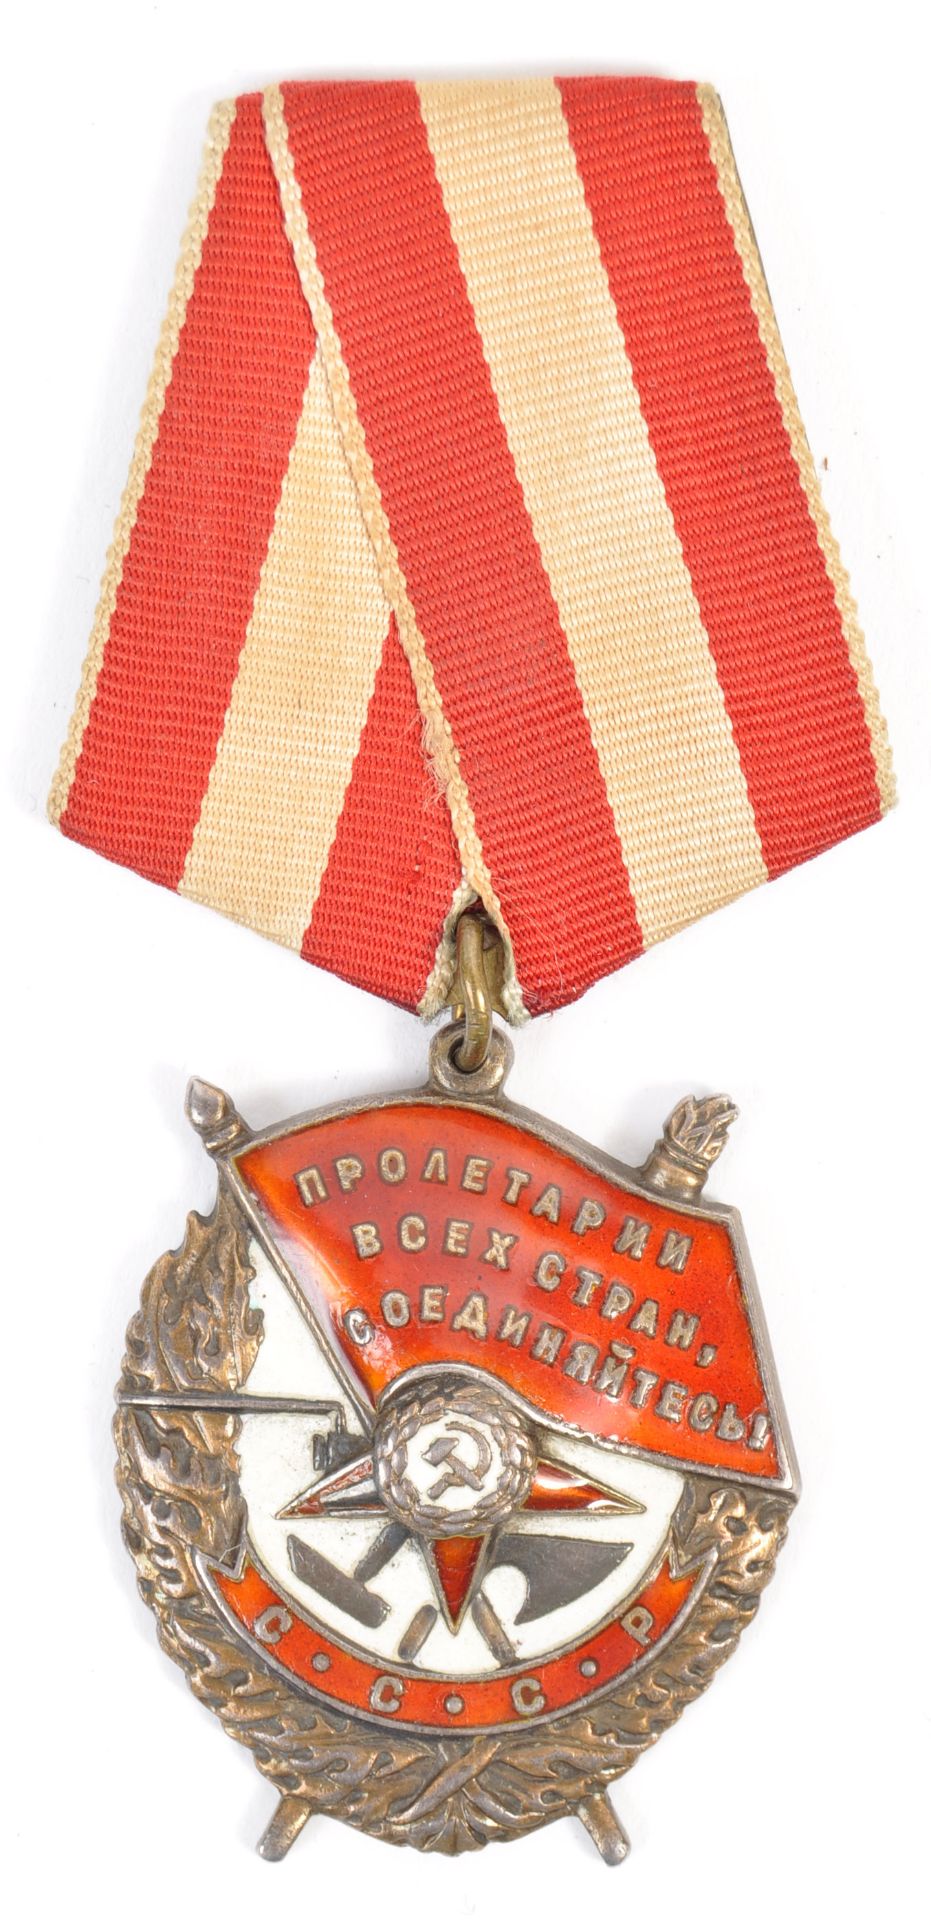 RARE ORIGINAL WWII RUSSIAN ORDER OF THE RED BANNER